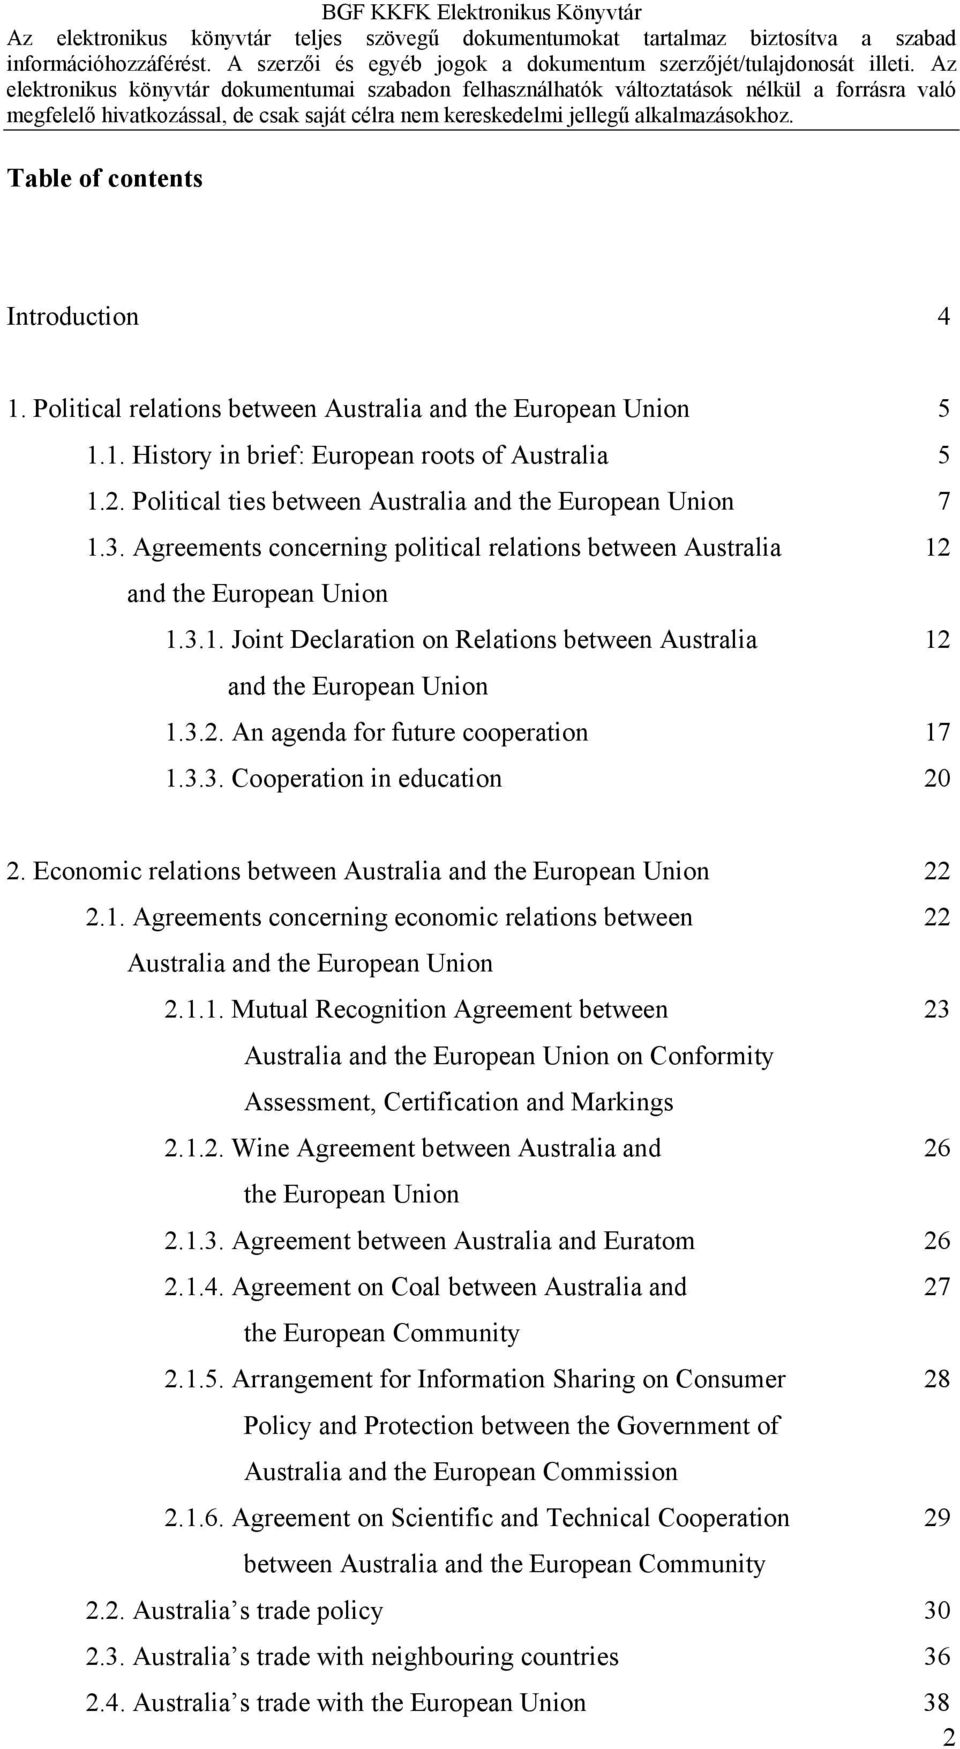 3.2. An agenda for future cooperation 17 1.3.3. Cooperation in education 20 2. Economic relations between Australia and the European Union 22 2.1. Agreements concerning economic relations between 22 Australia and the European Union 2.